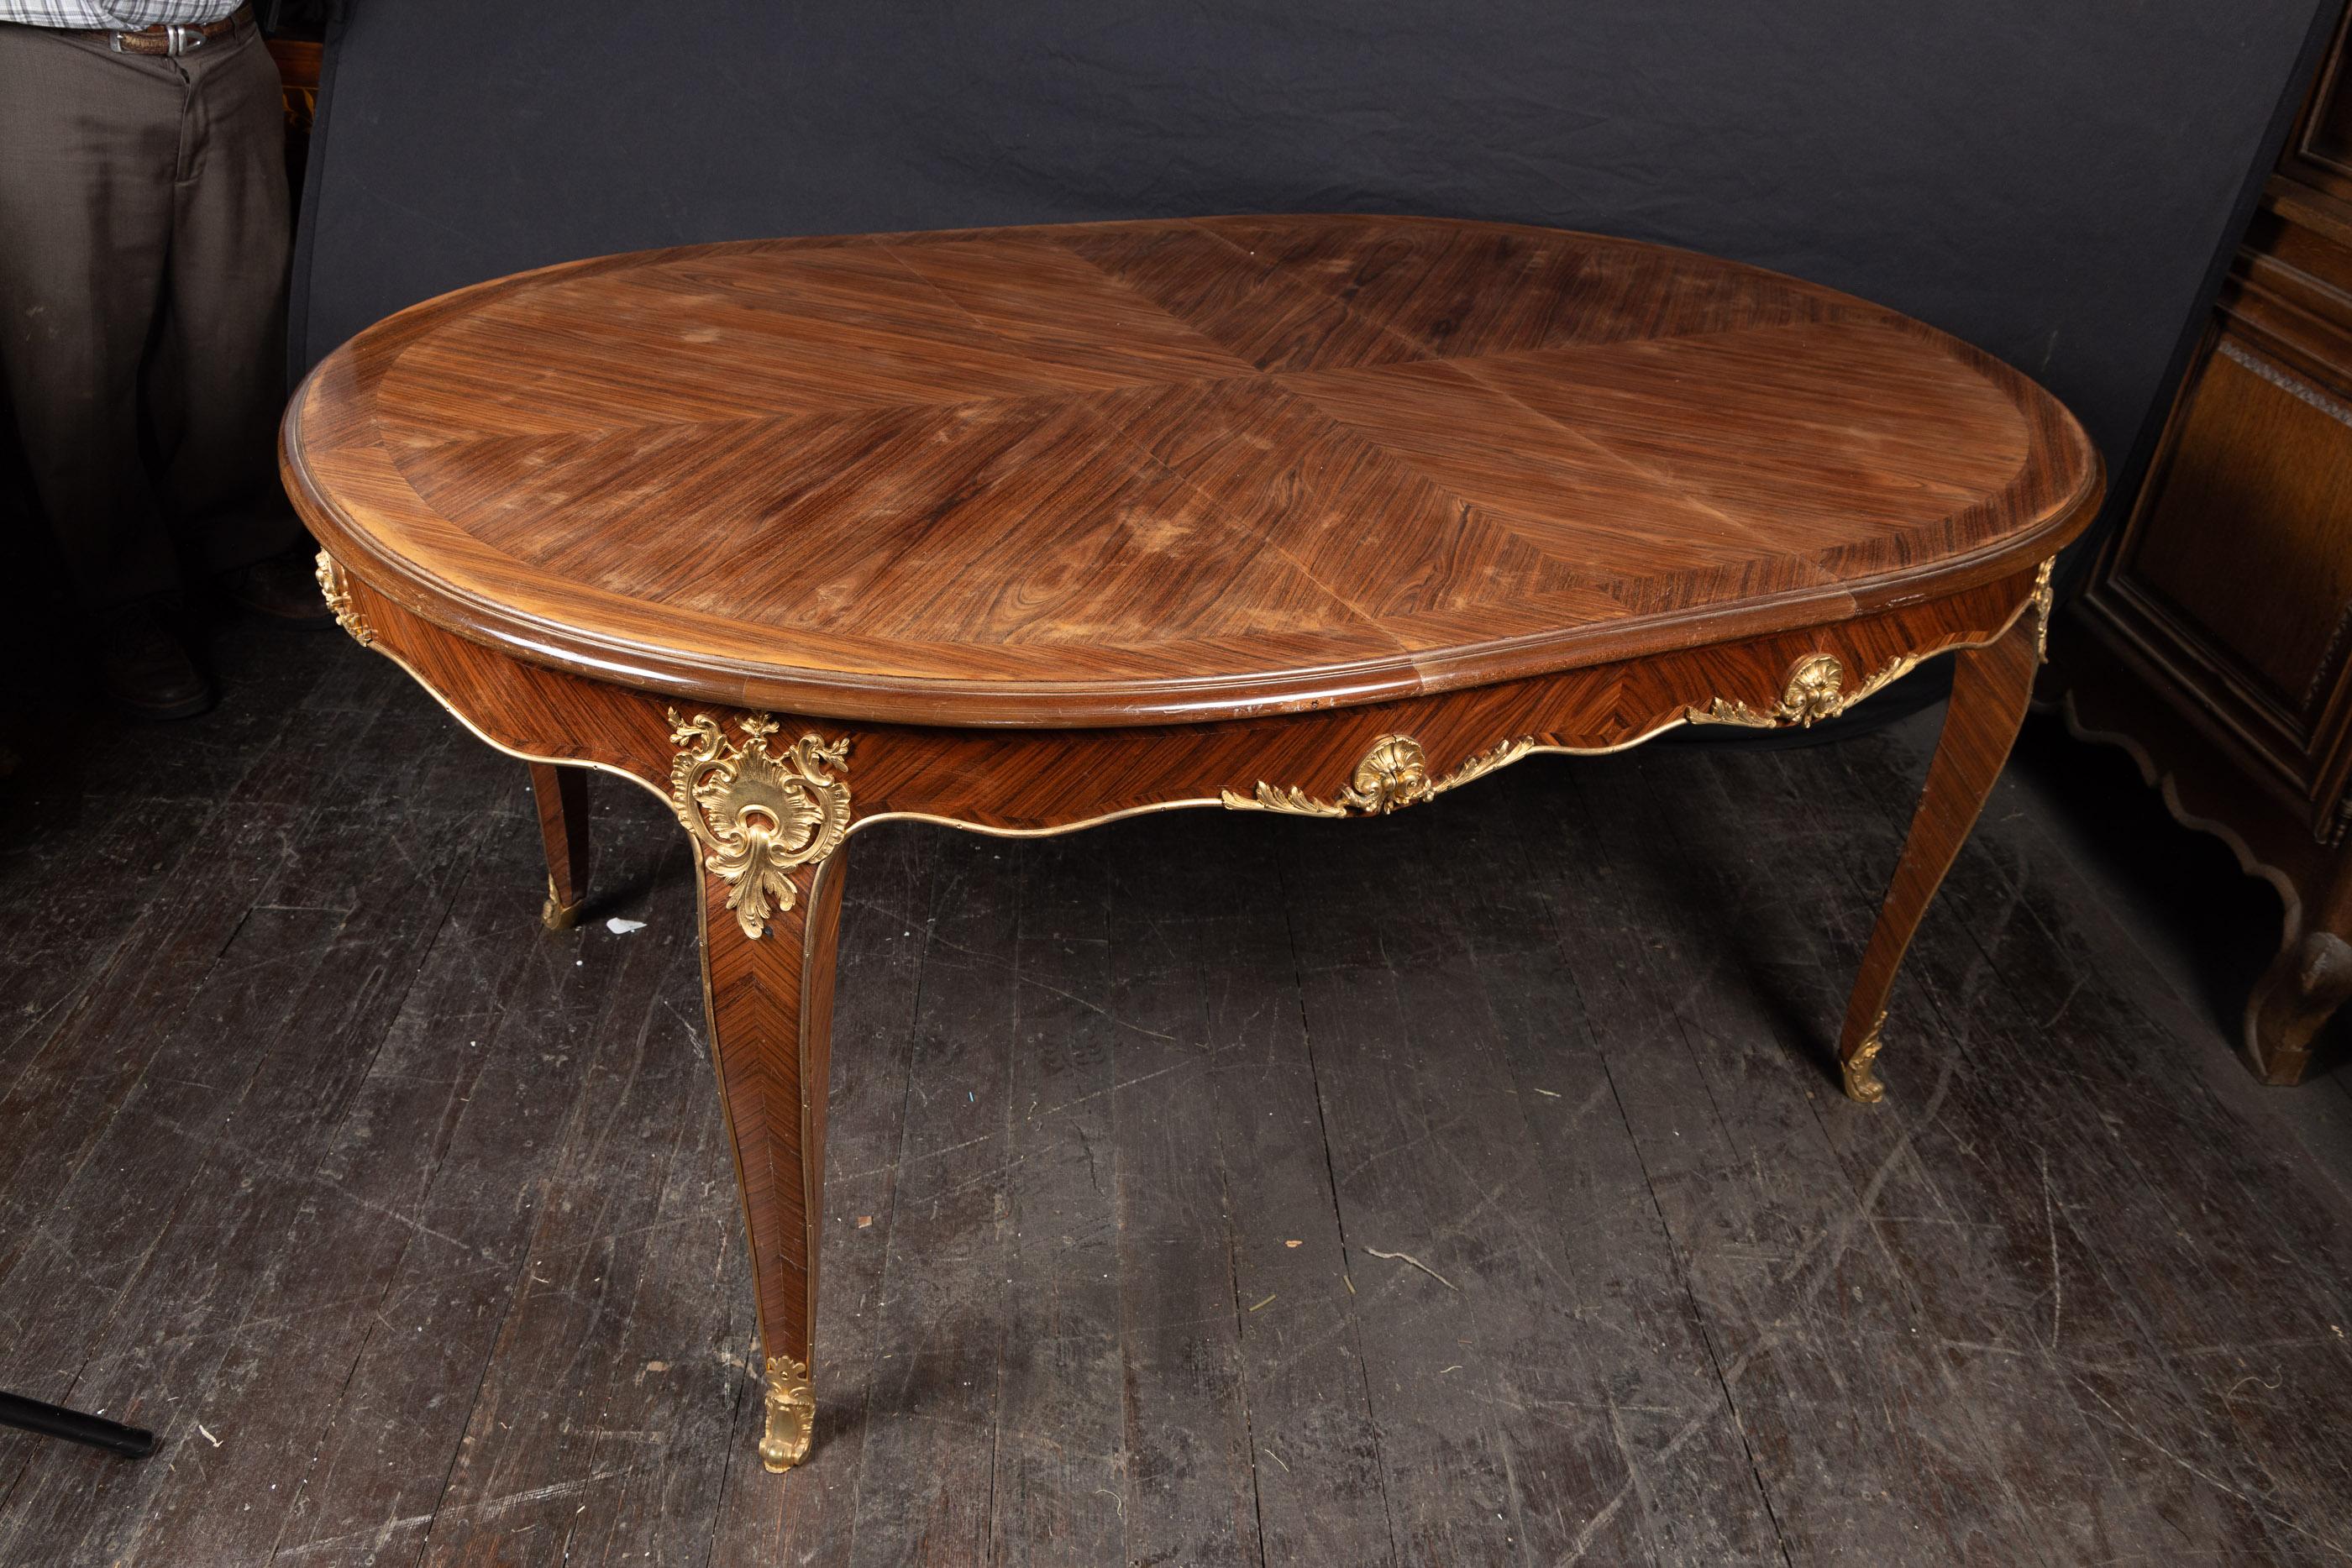 French 19th Century Louis XV Marquetry Dining Table Bronze D'ore Mounts and Leaf In Fair Condition For Sale In New Orleans, LA